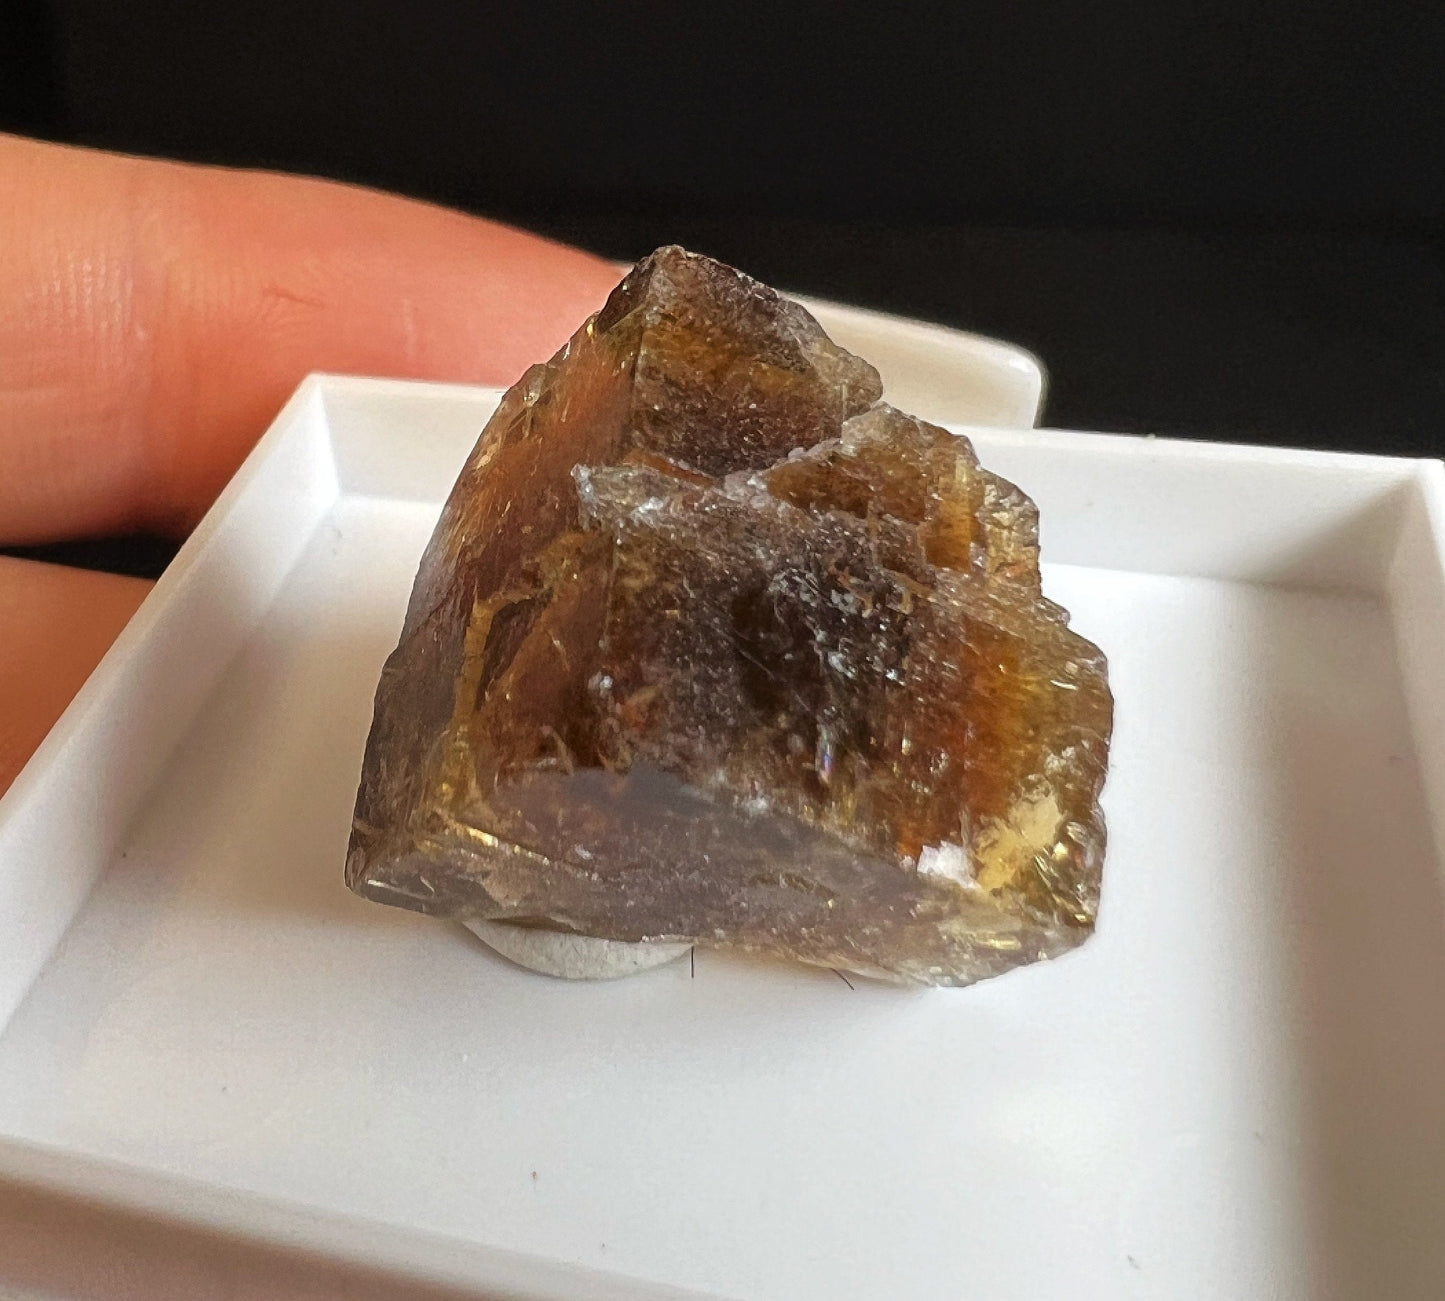 Fluorite Cube From Grasse, Alpes Maritimes, Alpes-Cote D'Azur, France- Collectors Piece, Home Décor (Box Included)